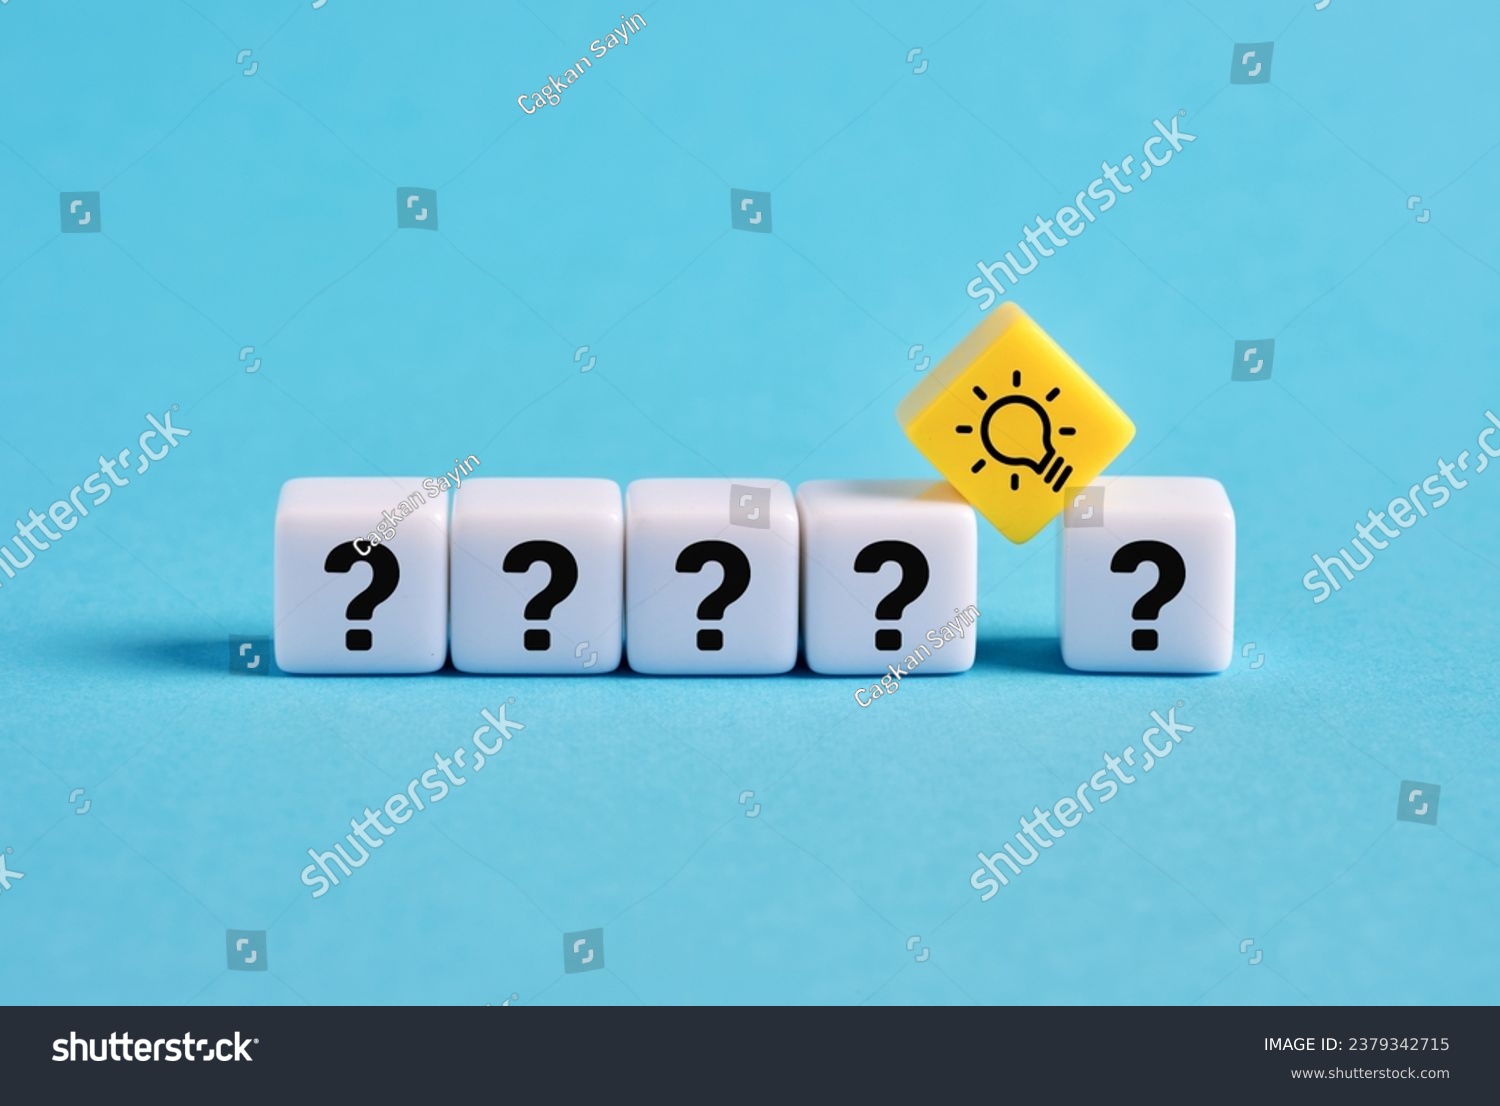 Problem solving. To find a creative business solution. Brainstorming and idea formation. Question mark and light bulb symbols on cubes. #2379342715